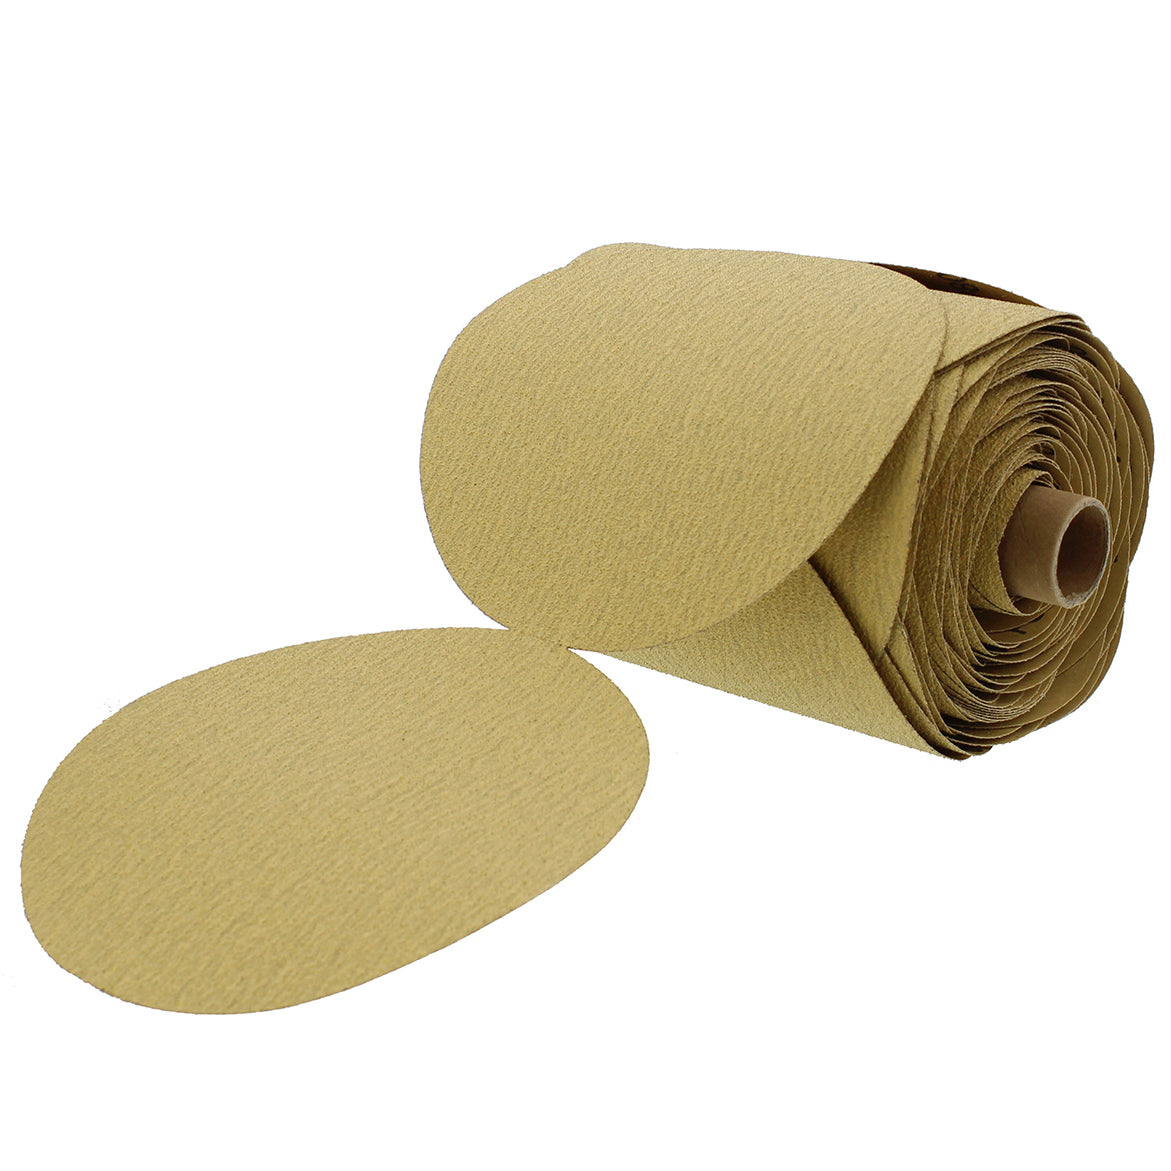 180 Grit Sandpaper Roll - 6 IN Round Sanding Discs Sticky Back, 100Pc